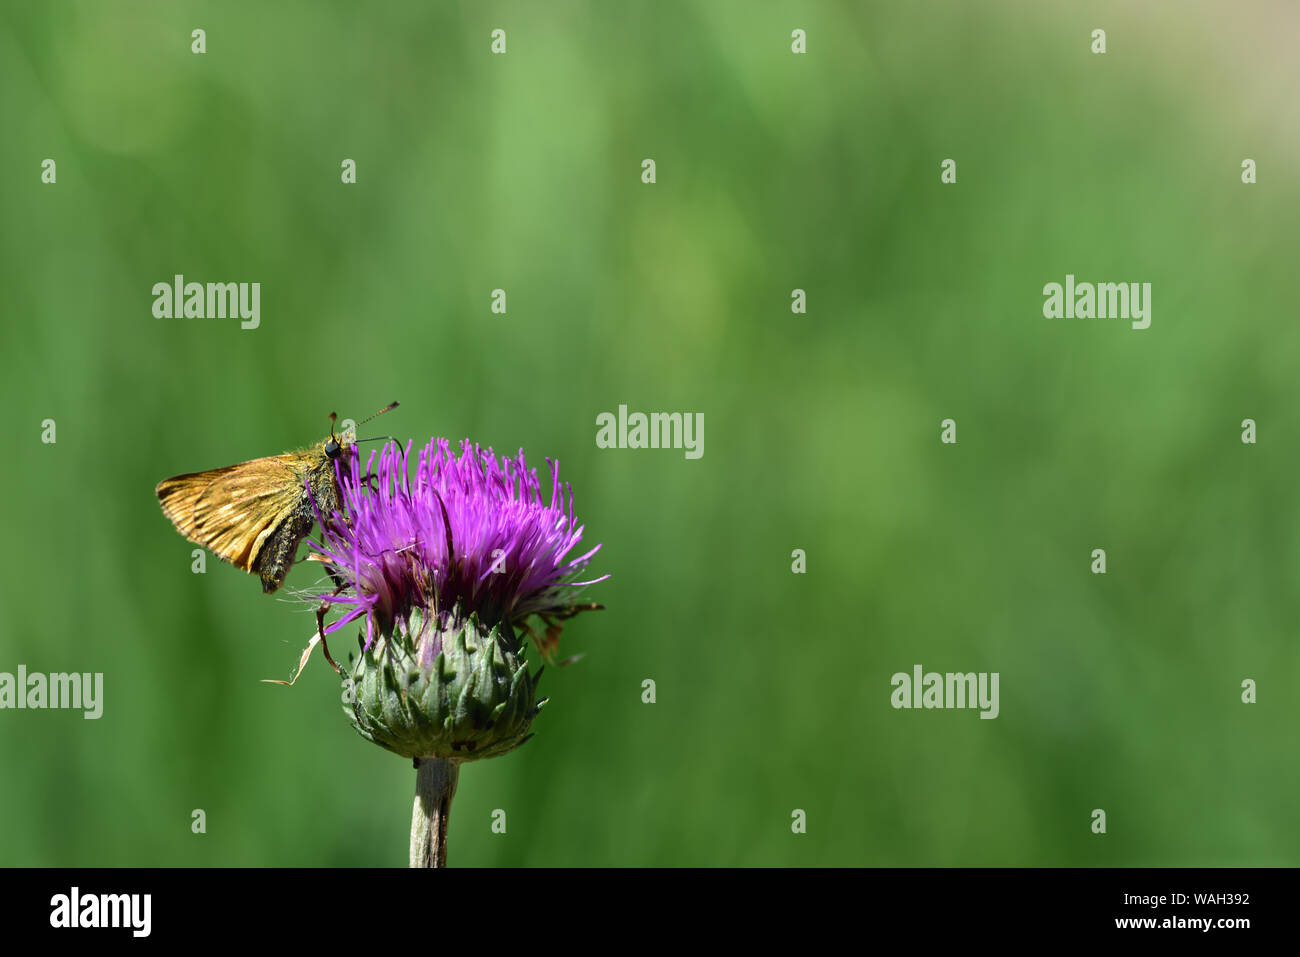 A small brown butterfly is sitting at a purple blossom in front of green background Stock Photo